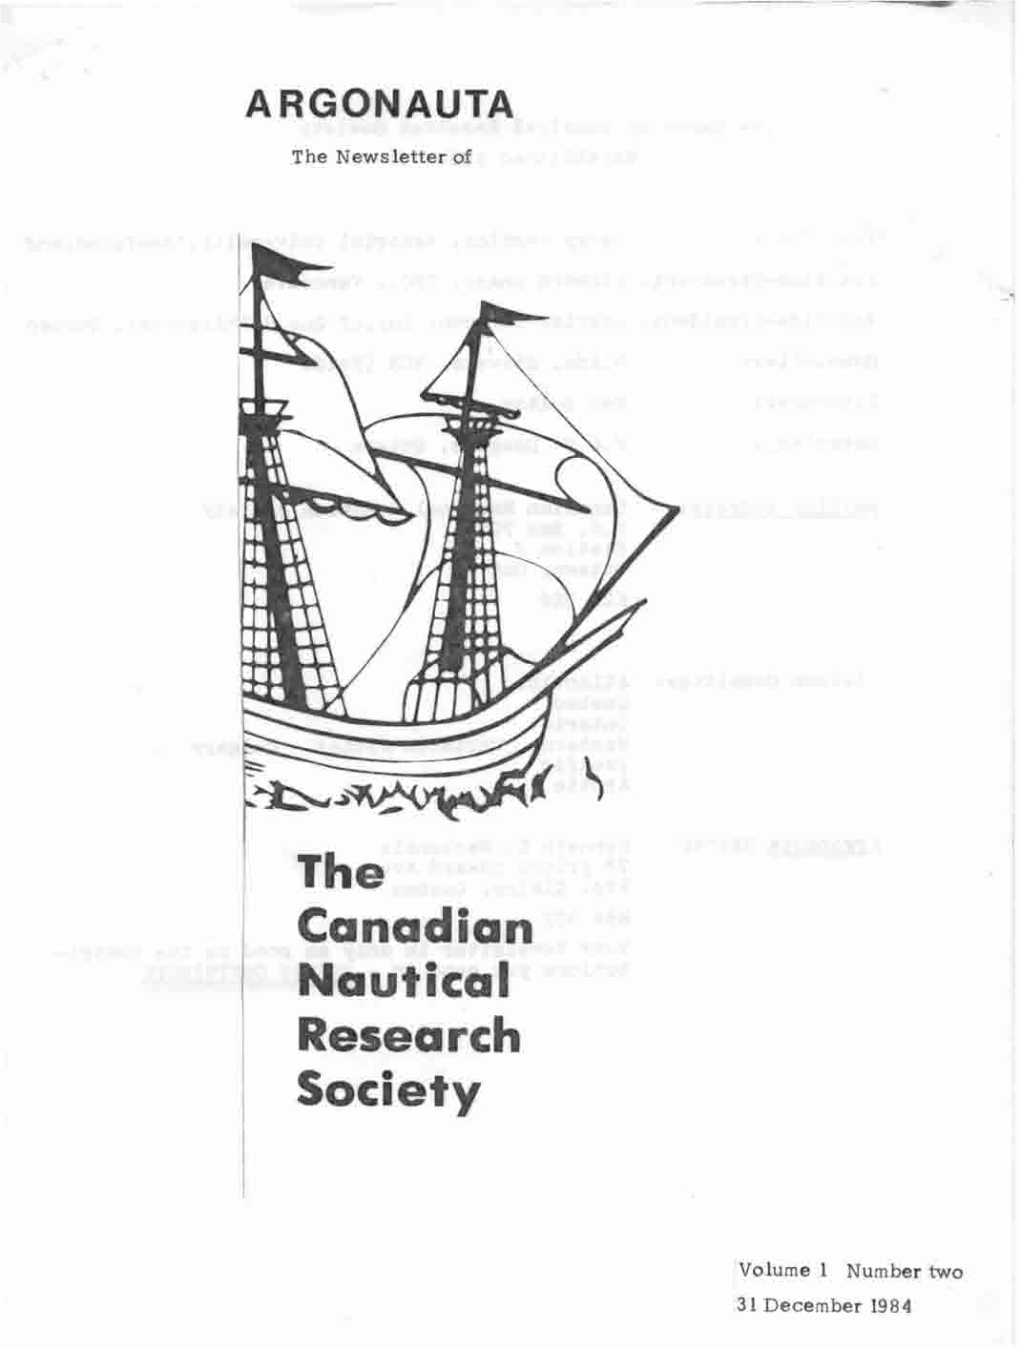 December 1984 the Canadian Nautical Research Society Established 1984